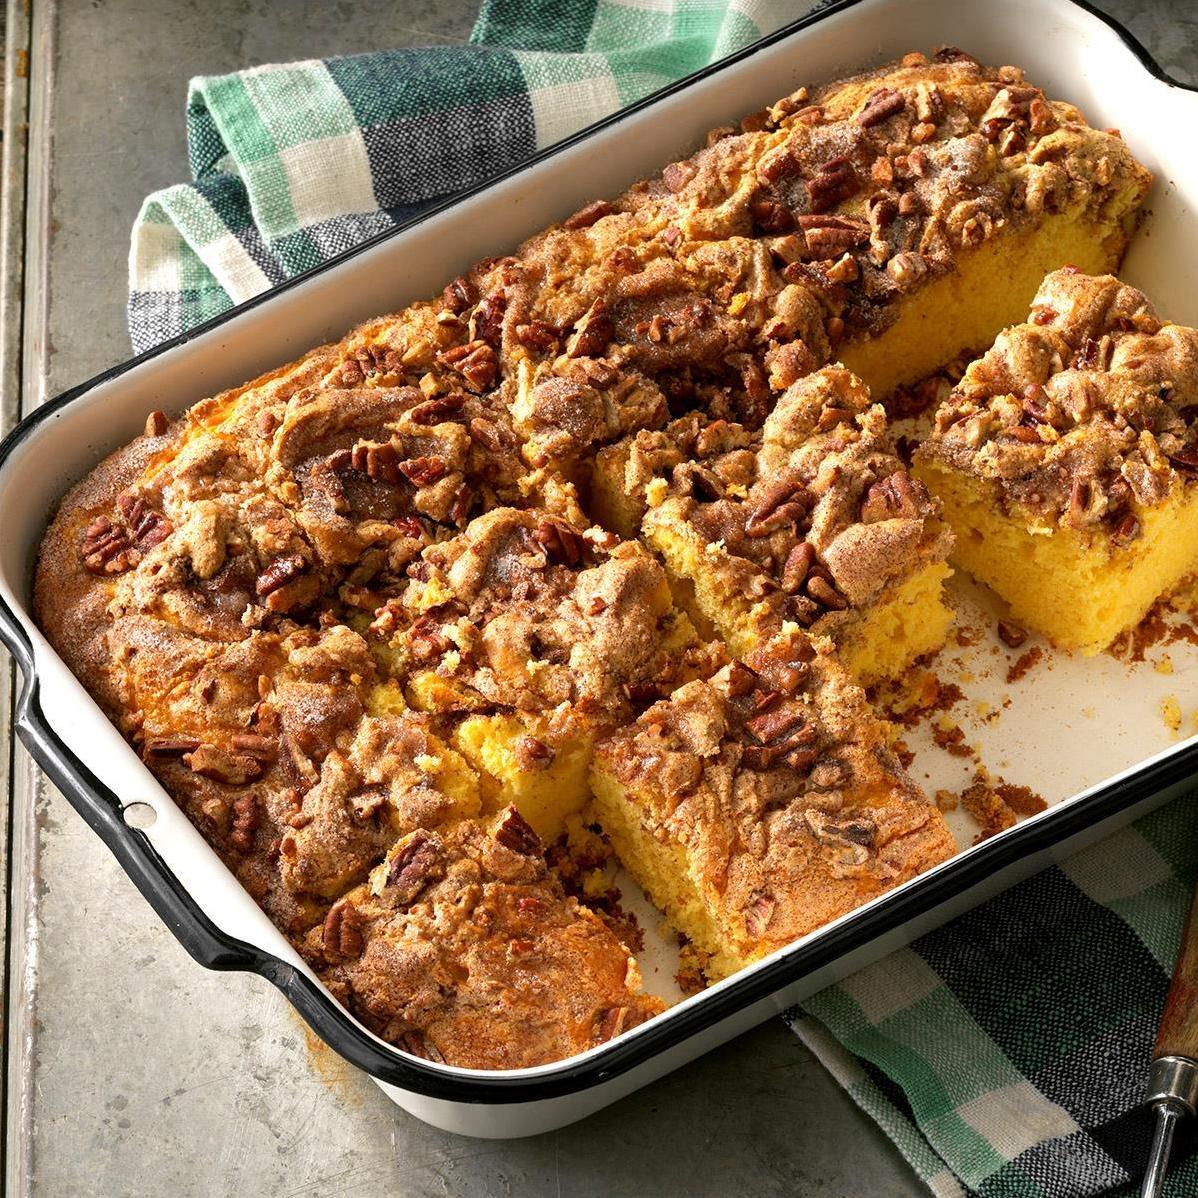  Are you ready to sink your teeth into this delicious pecan coffee cake?